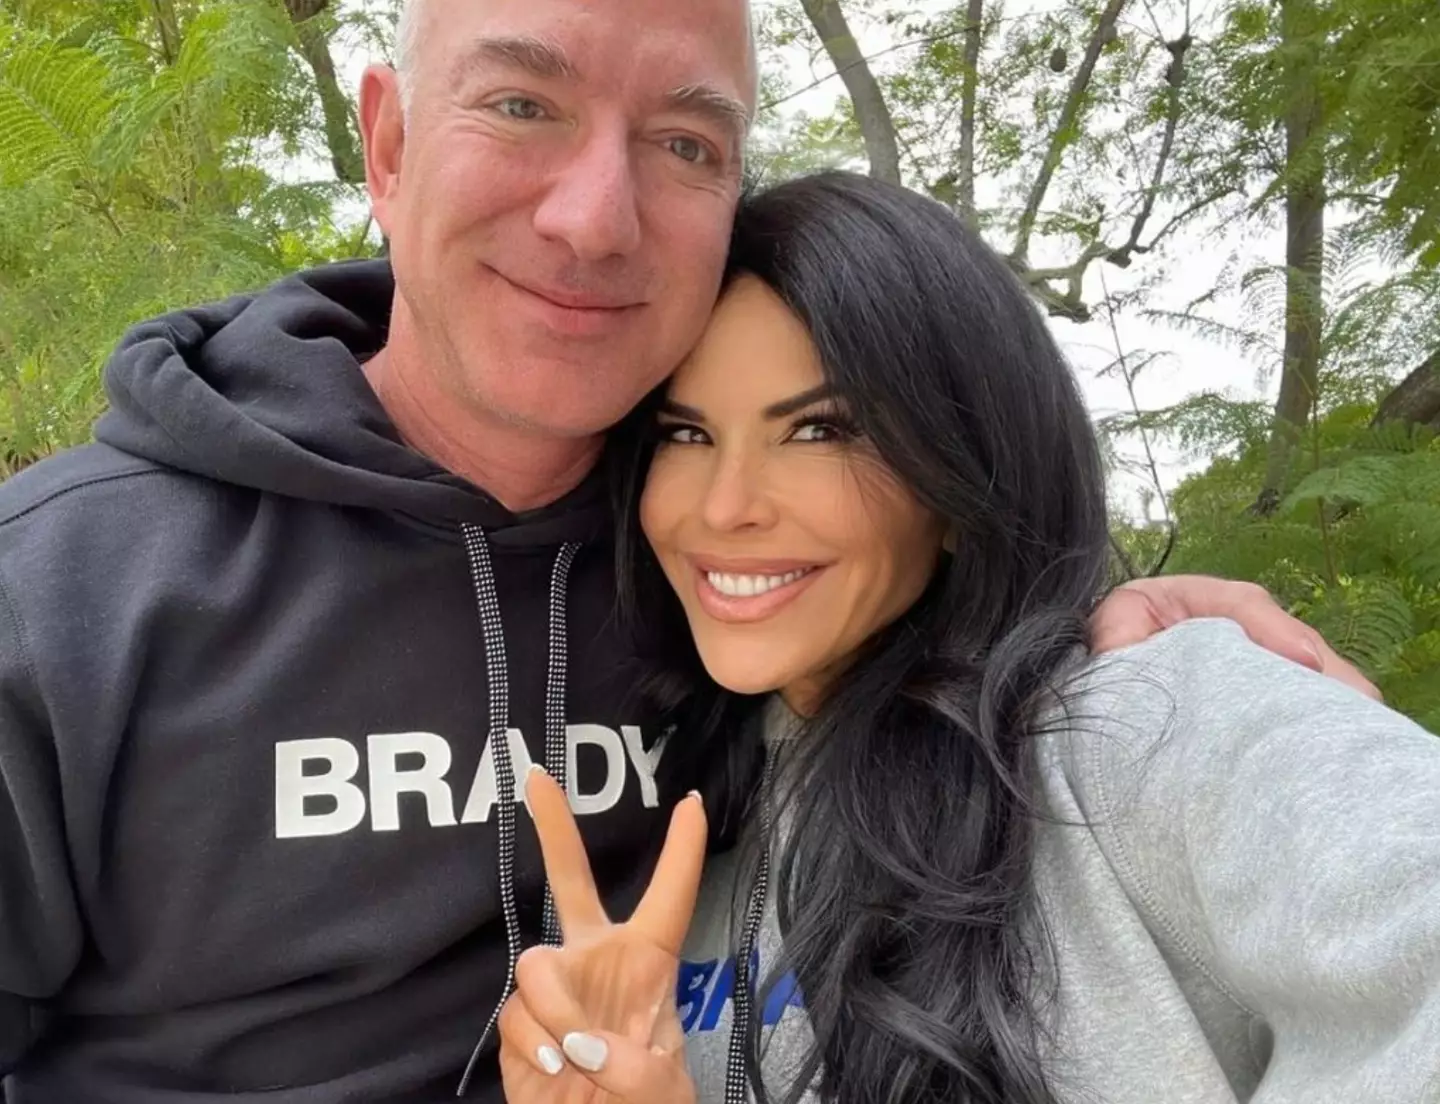 Jeff Bezos partied at his fiancée's mansion in Beverly Hills in aid of his birthday.